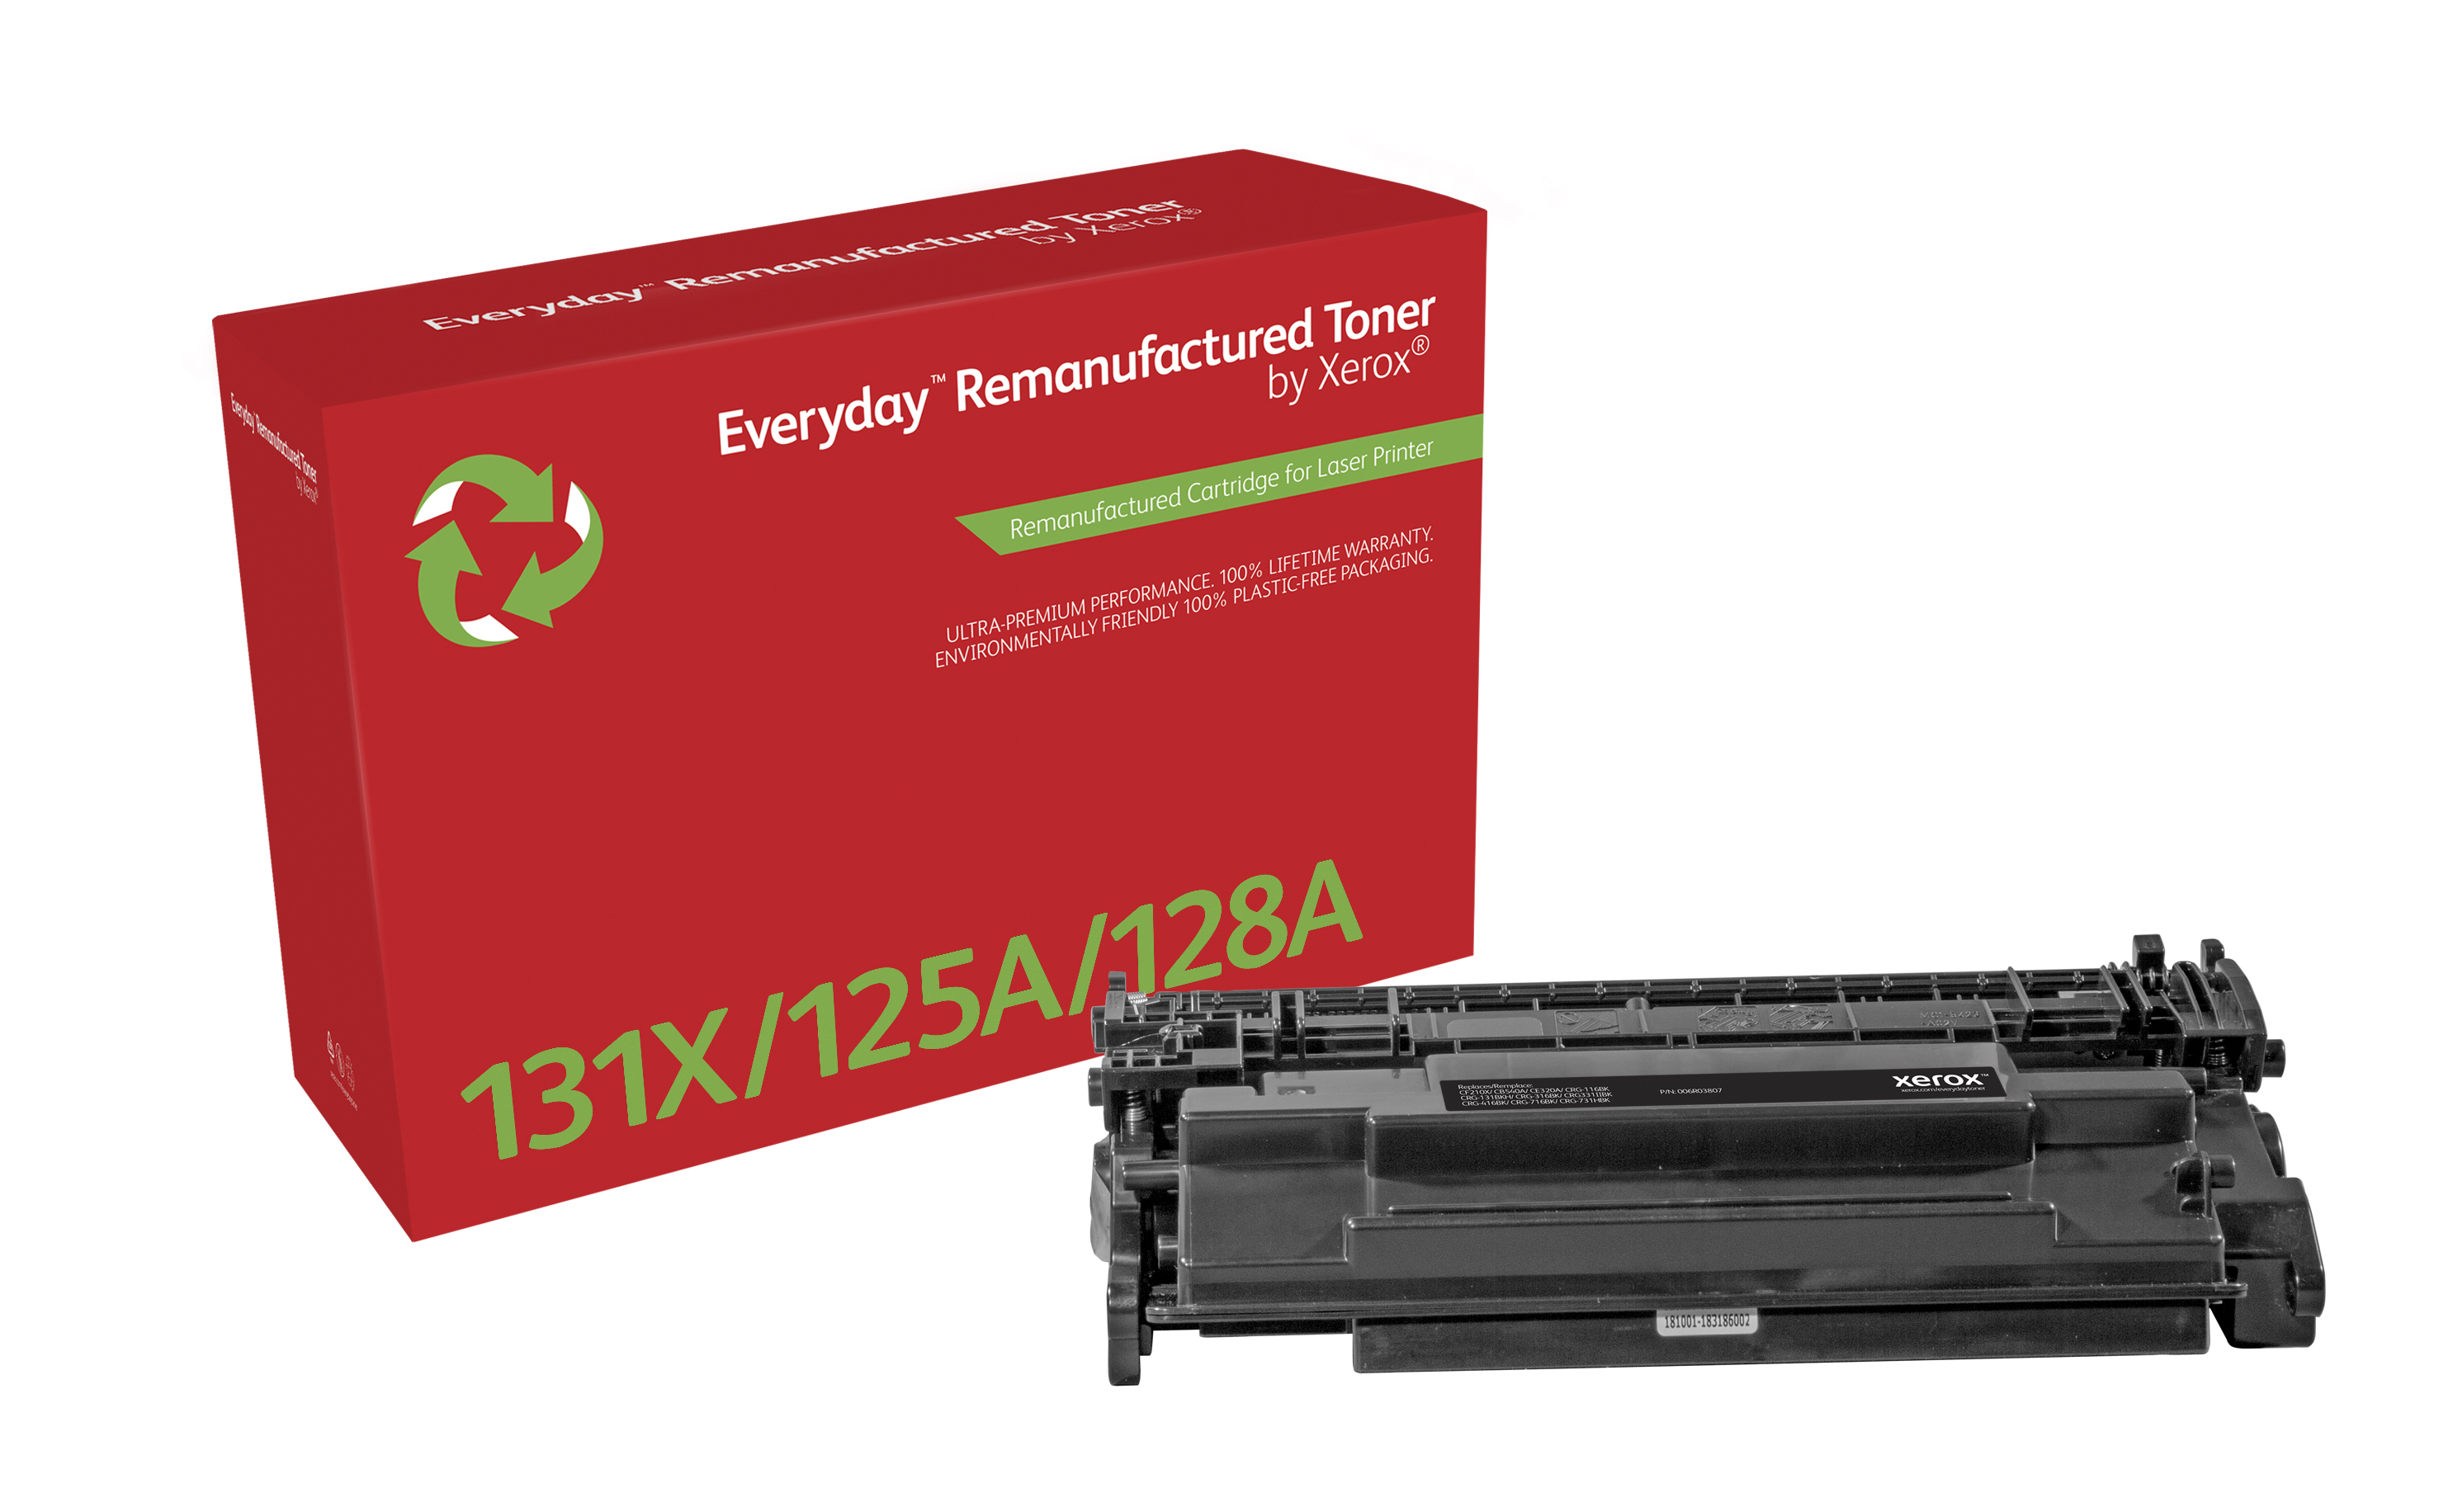 Everyday Black Toner compatible with HP 131X/ 125A/ 128A (CF210X/ CB540A/  CE320A), Standard Yield 006R03807 by Xerox